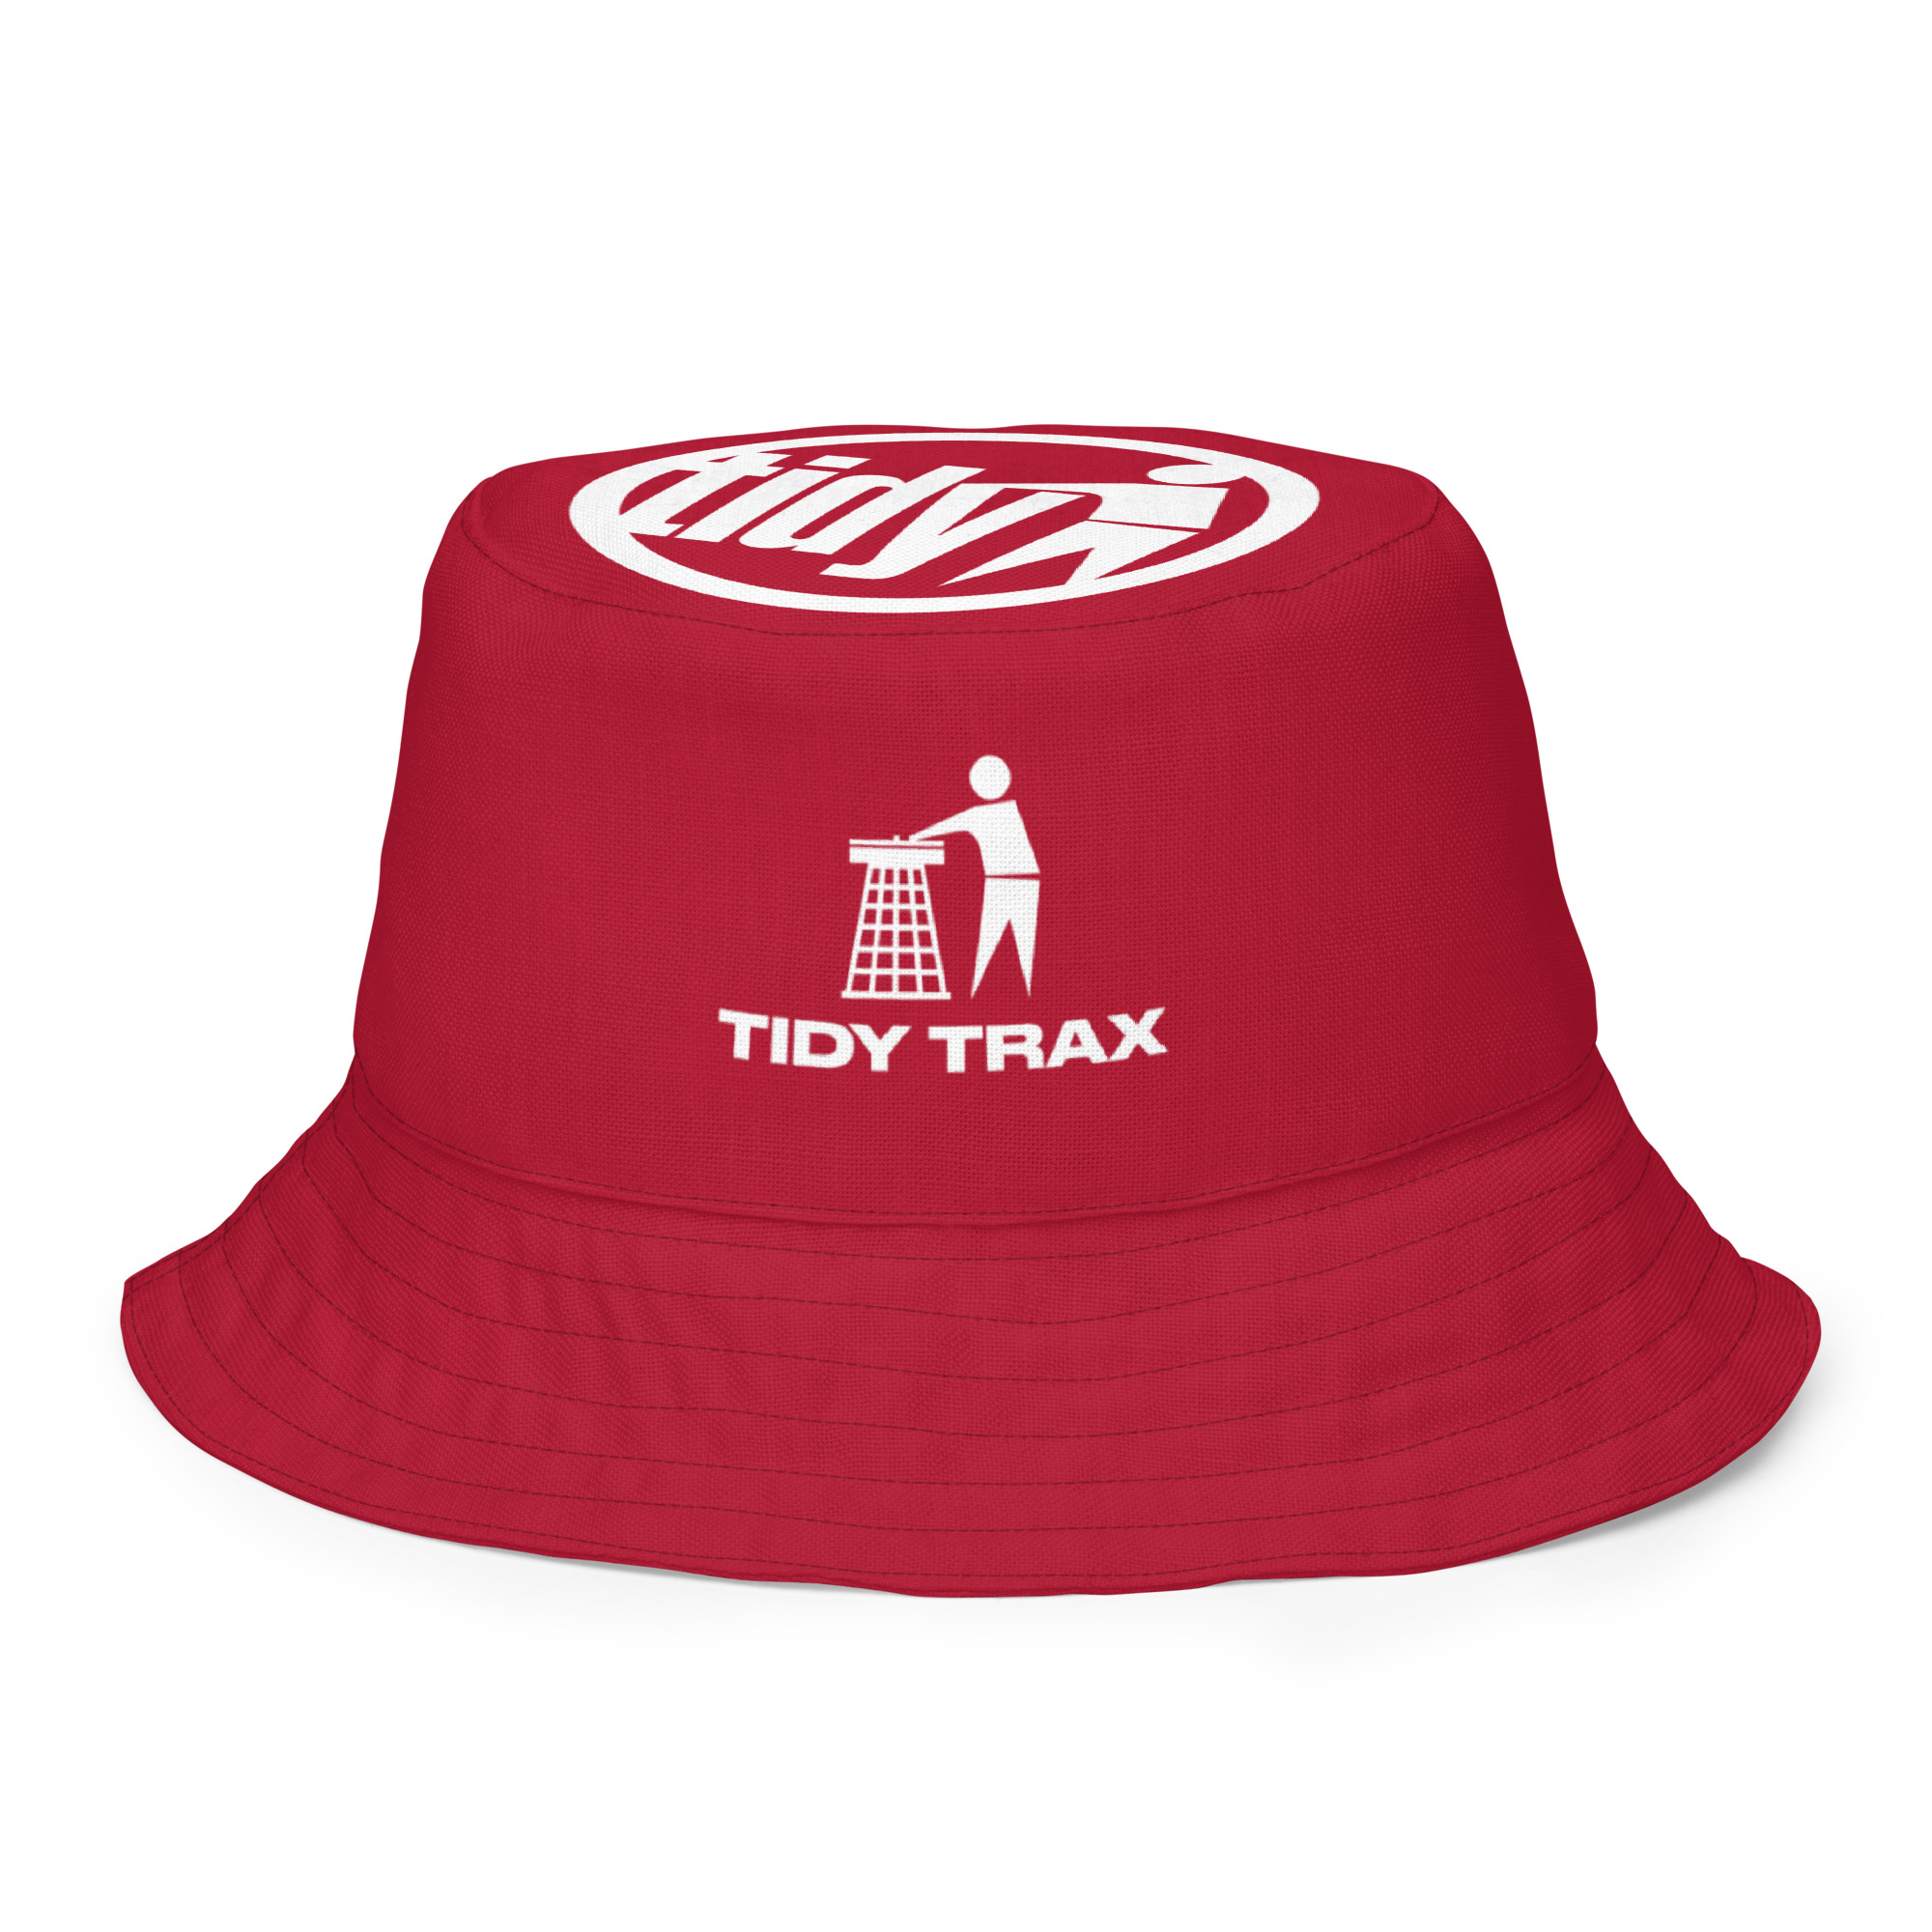 Tidy Red & White Reversible Bucket Hat - Tidy Trax